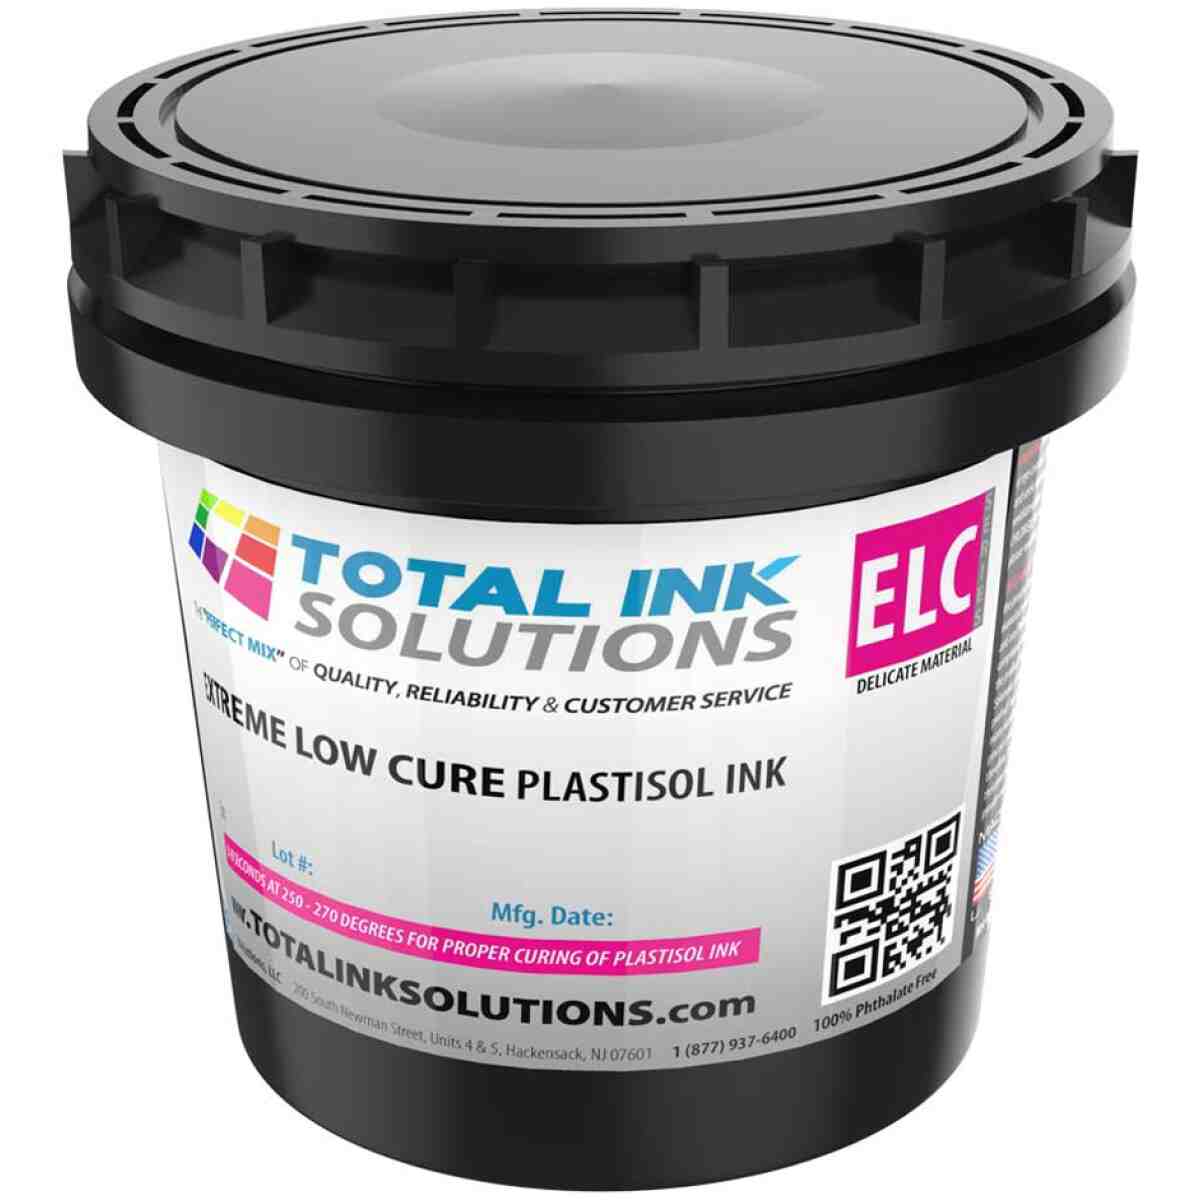 Extreme 270° Low Cure Plastisol Ink Series - Quart TOTAL INK SOLUTIONS®